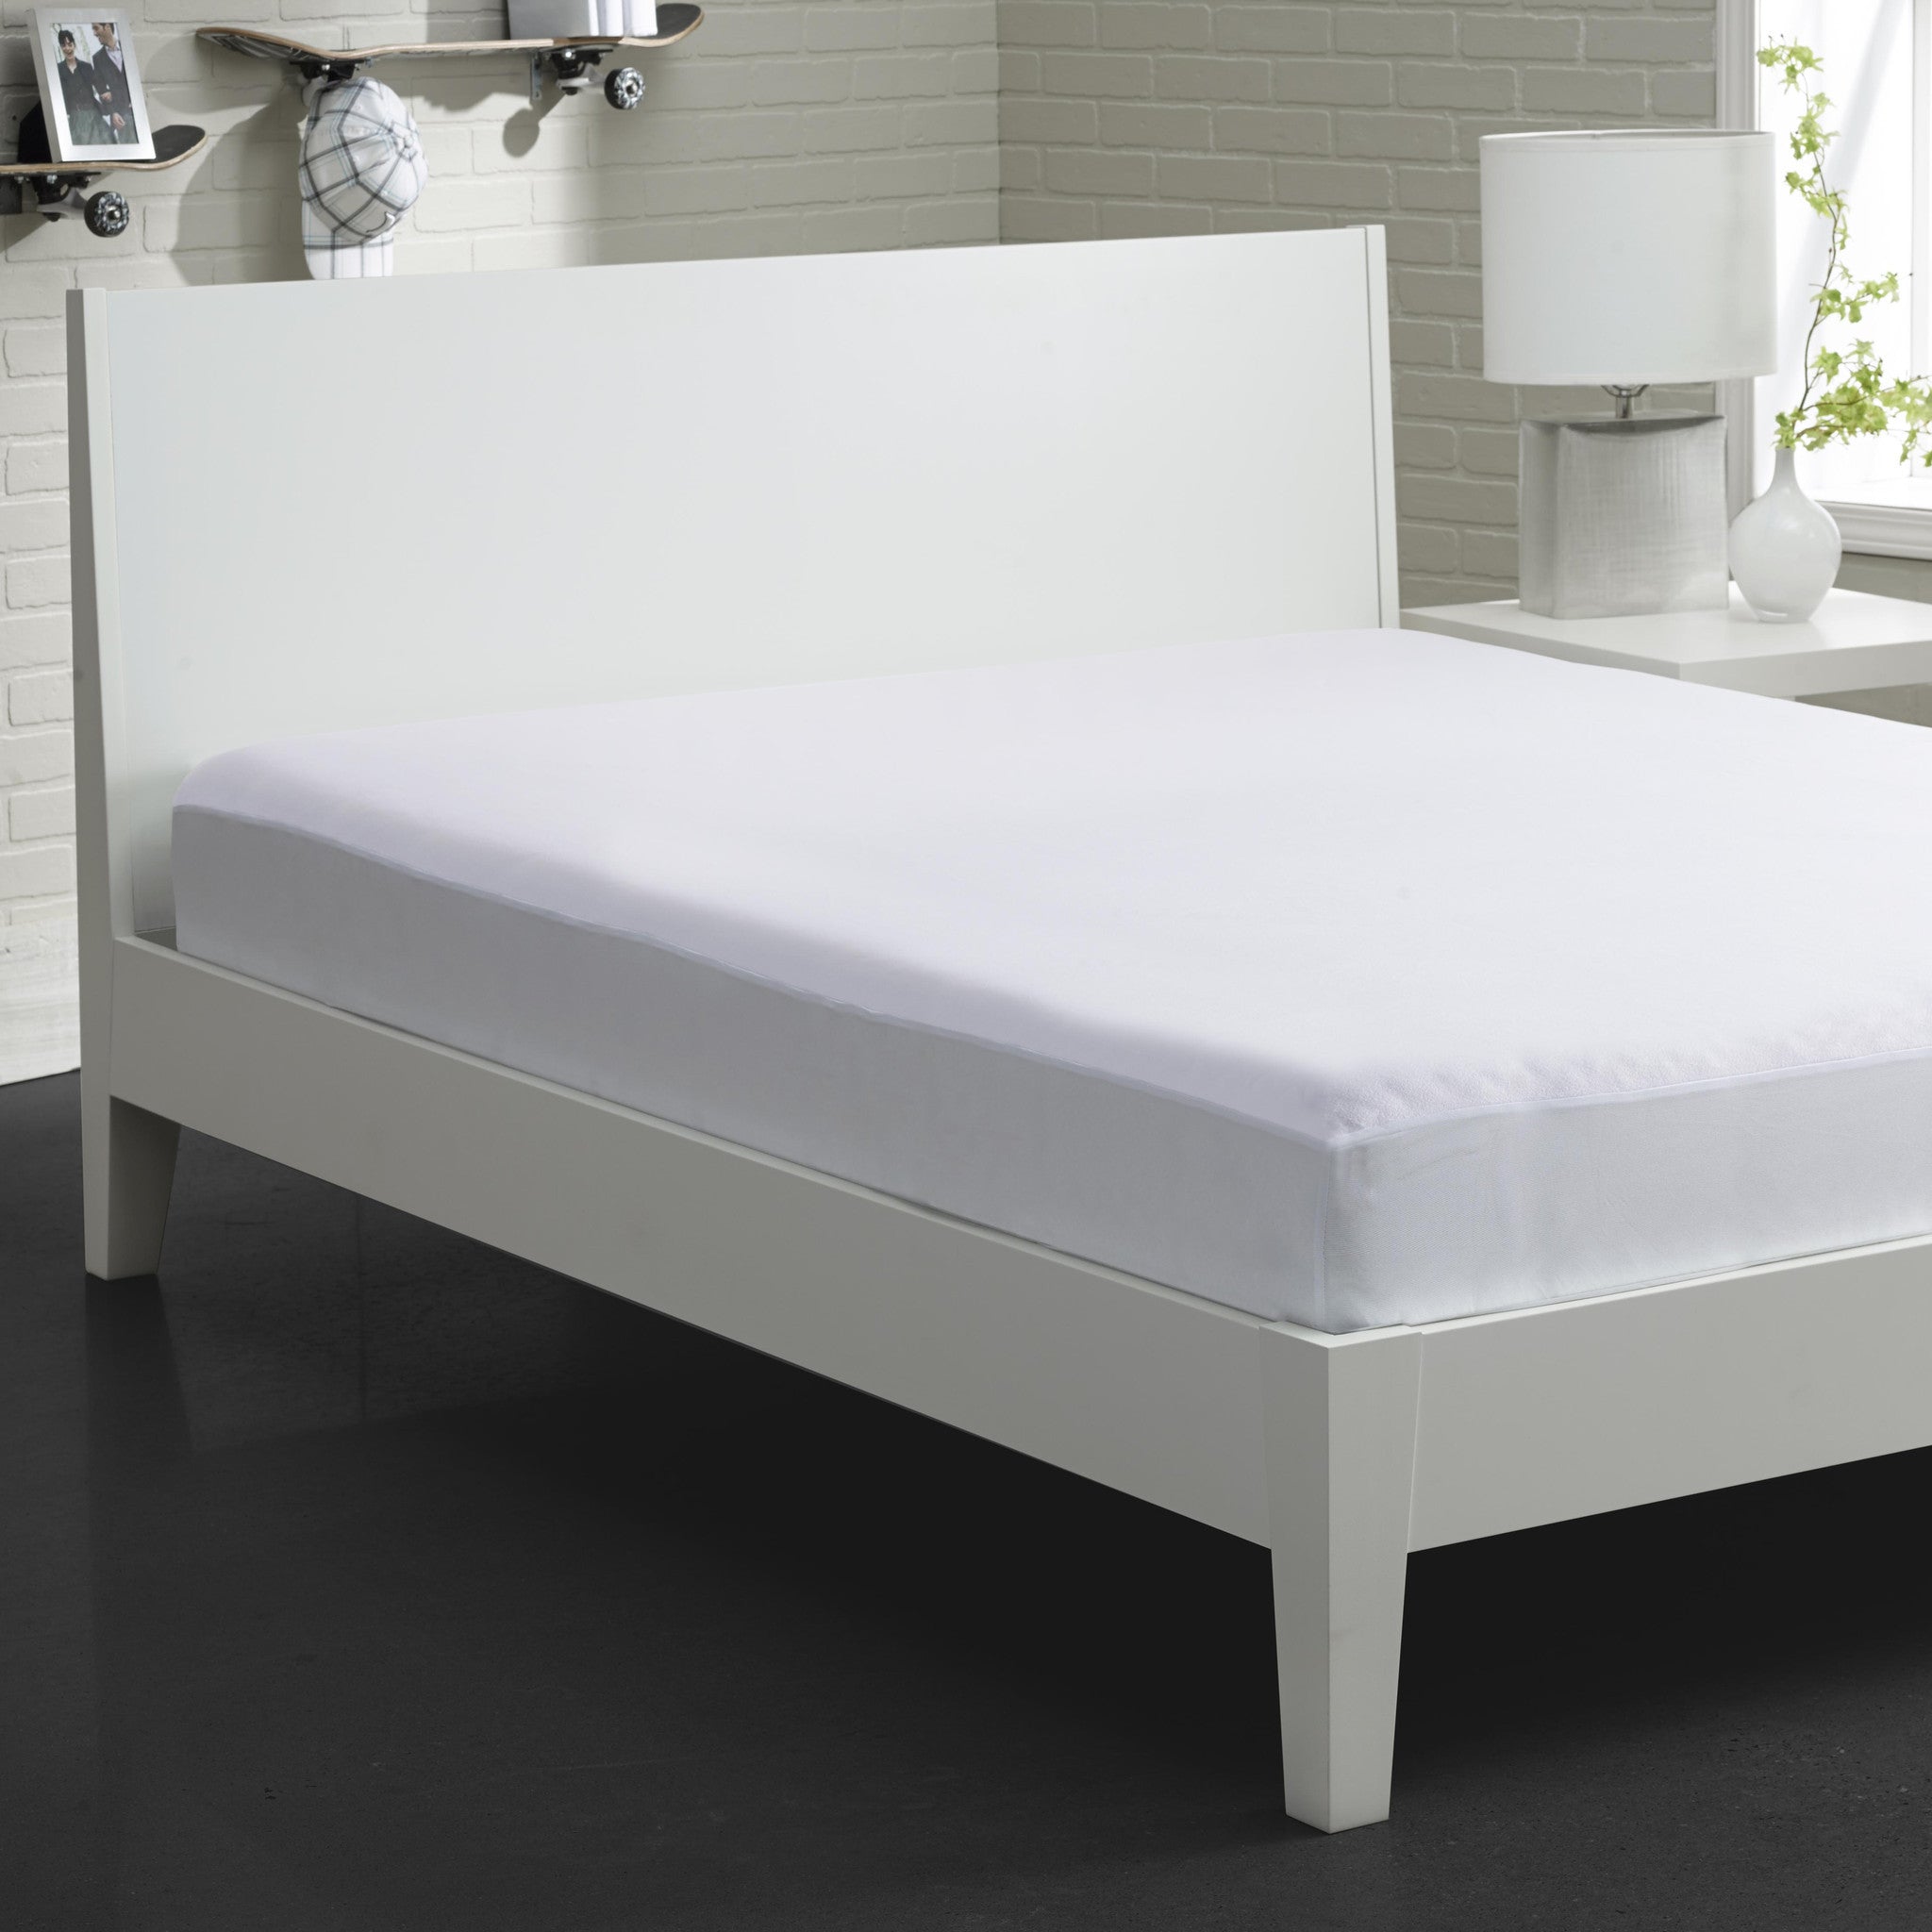 Accessories - IProtect Mattress Protector